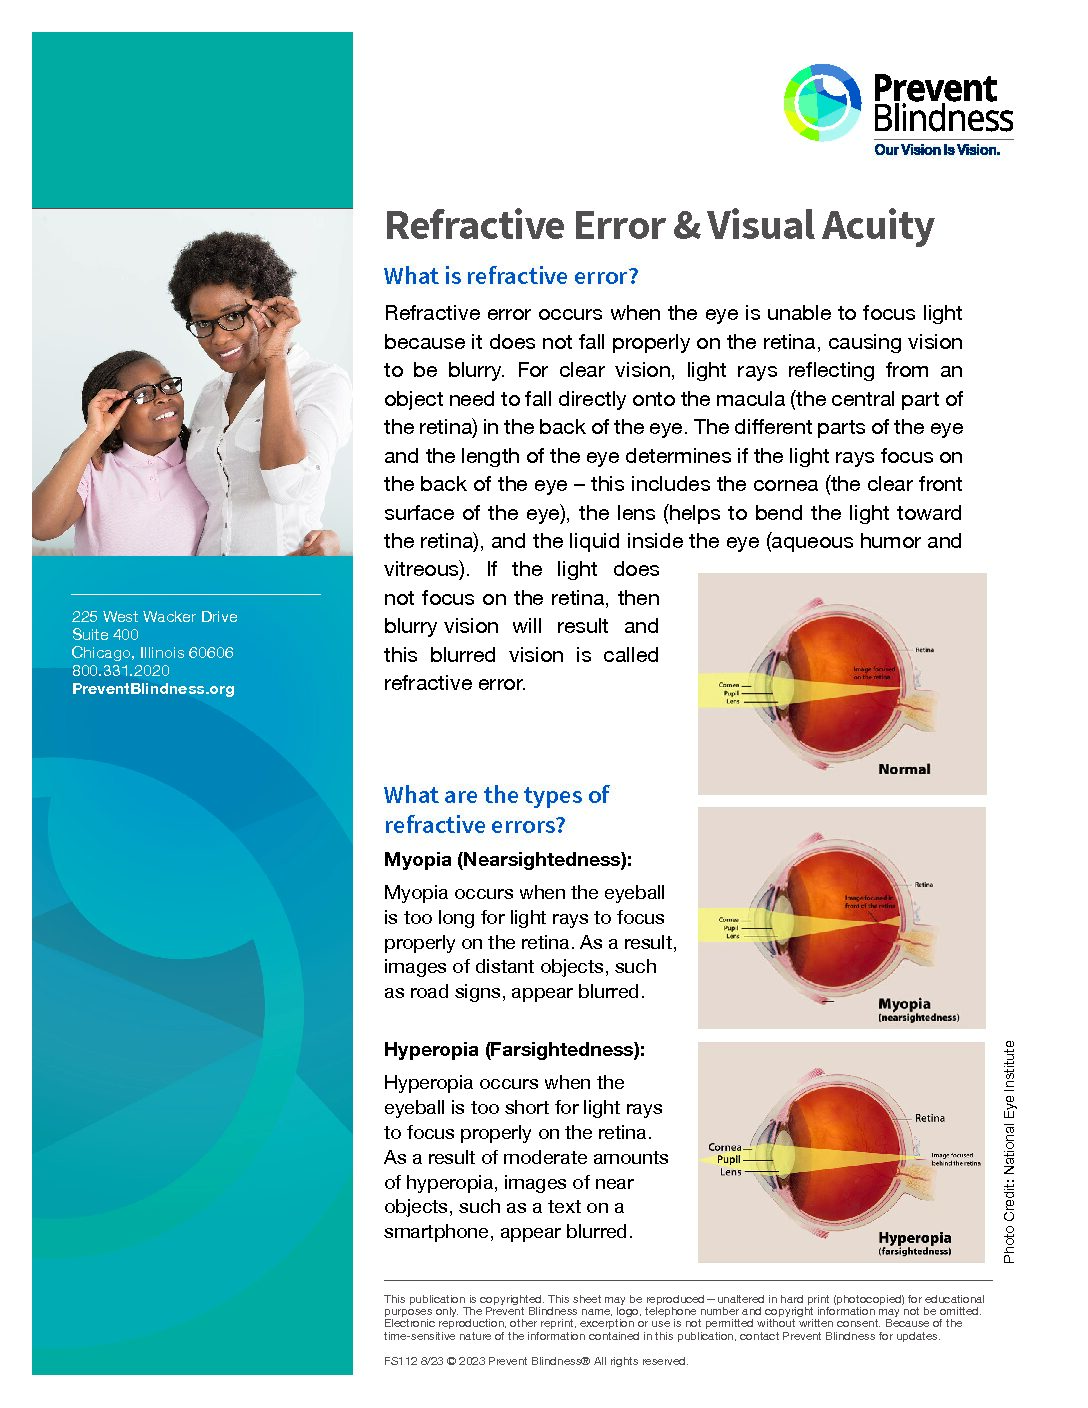 Refractive Error and Visual Acuity